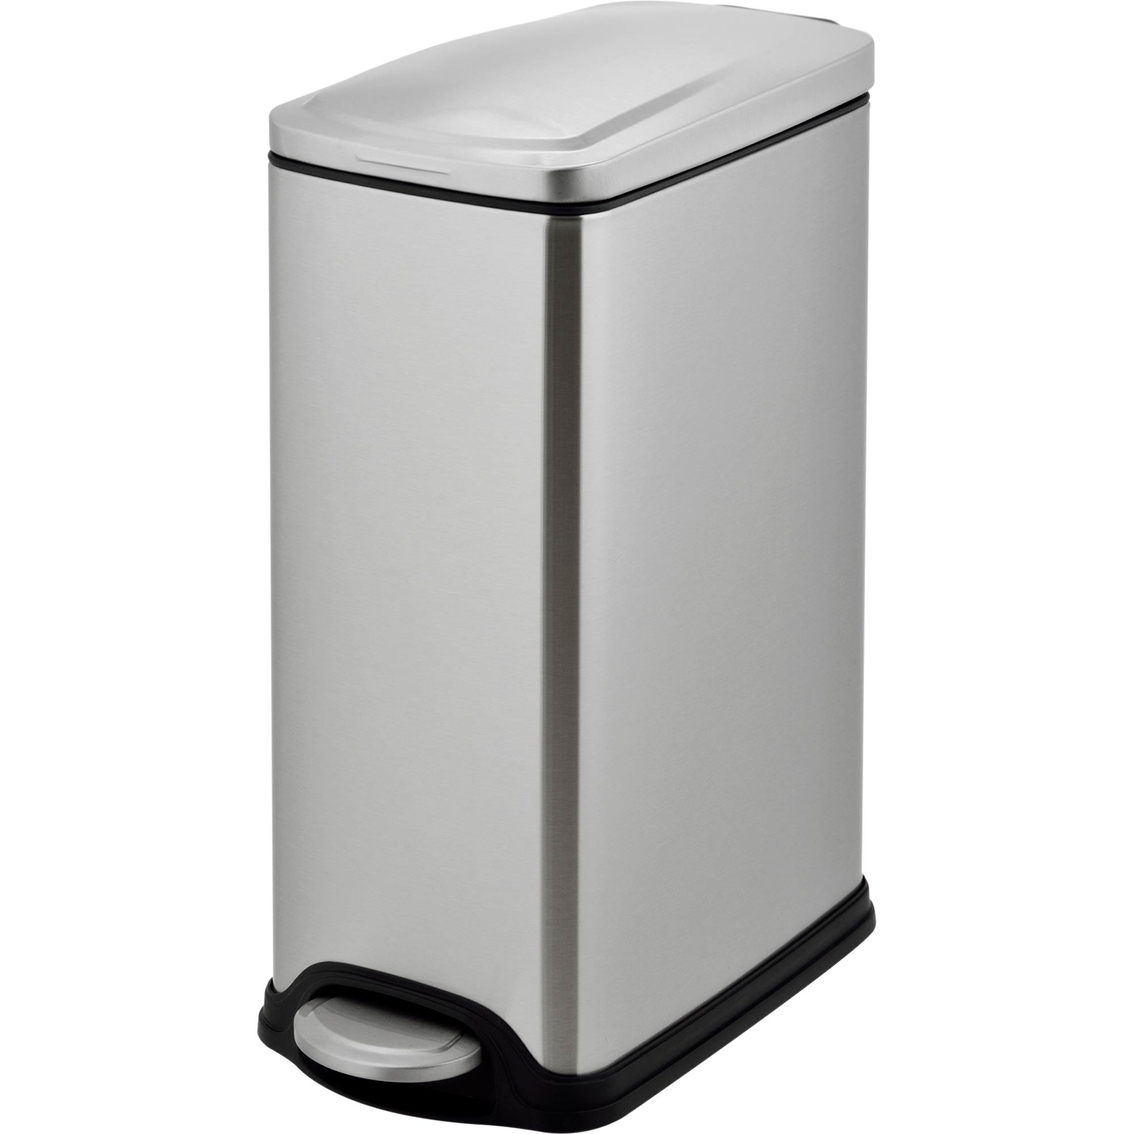 Simply Perfect Slim Trash Bin With Stainless Steel Lid 10l | Trash Cans ...